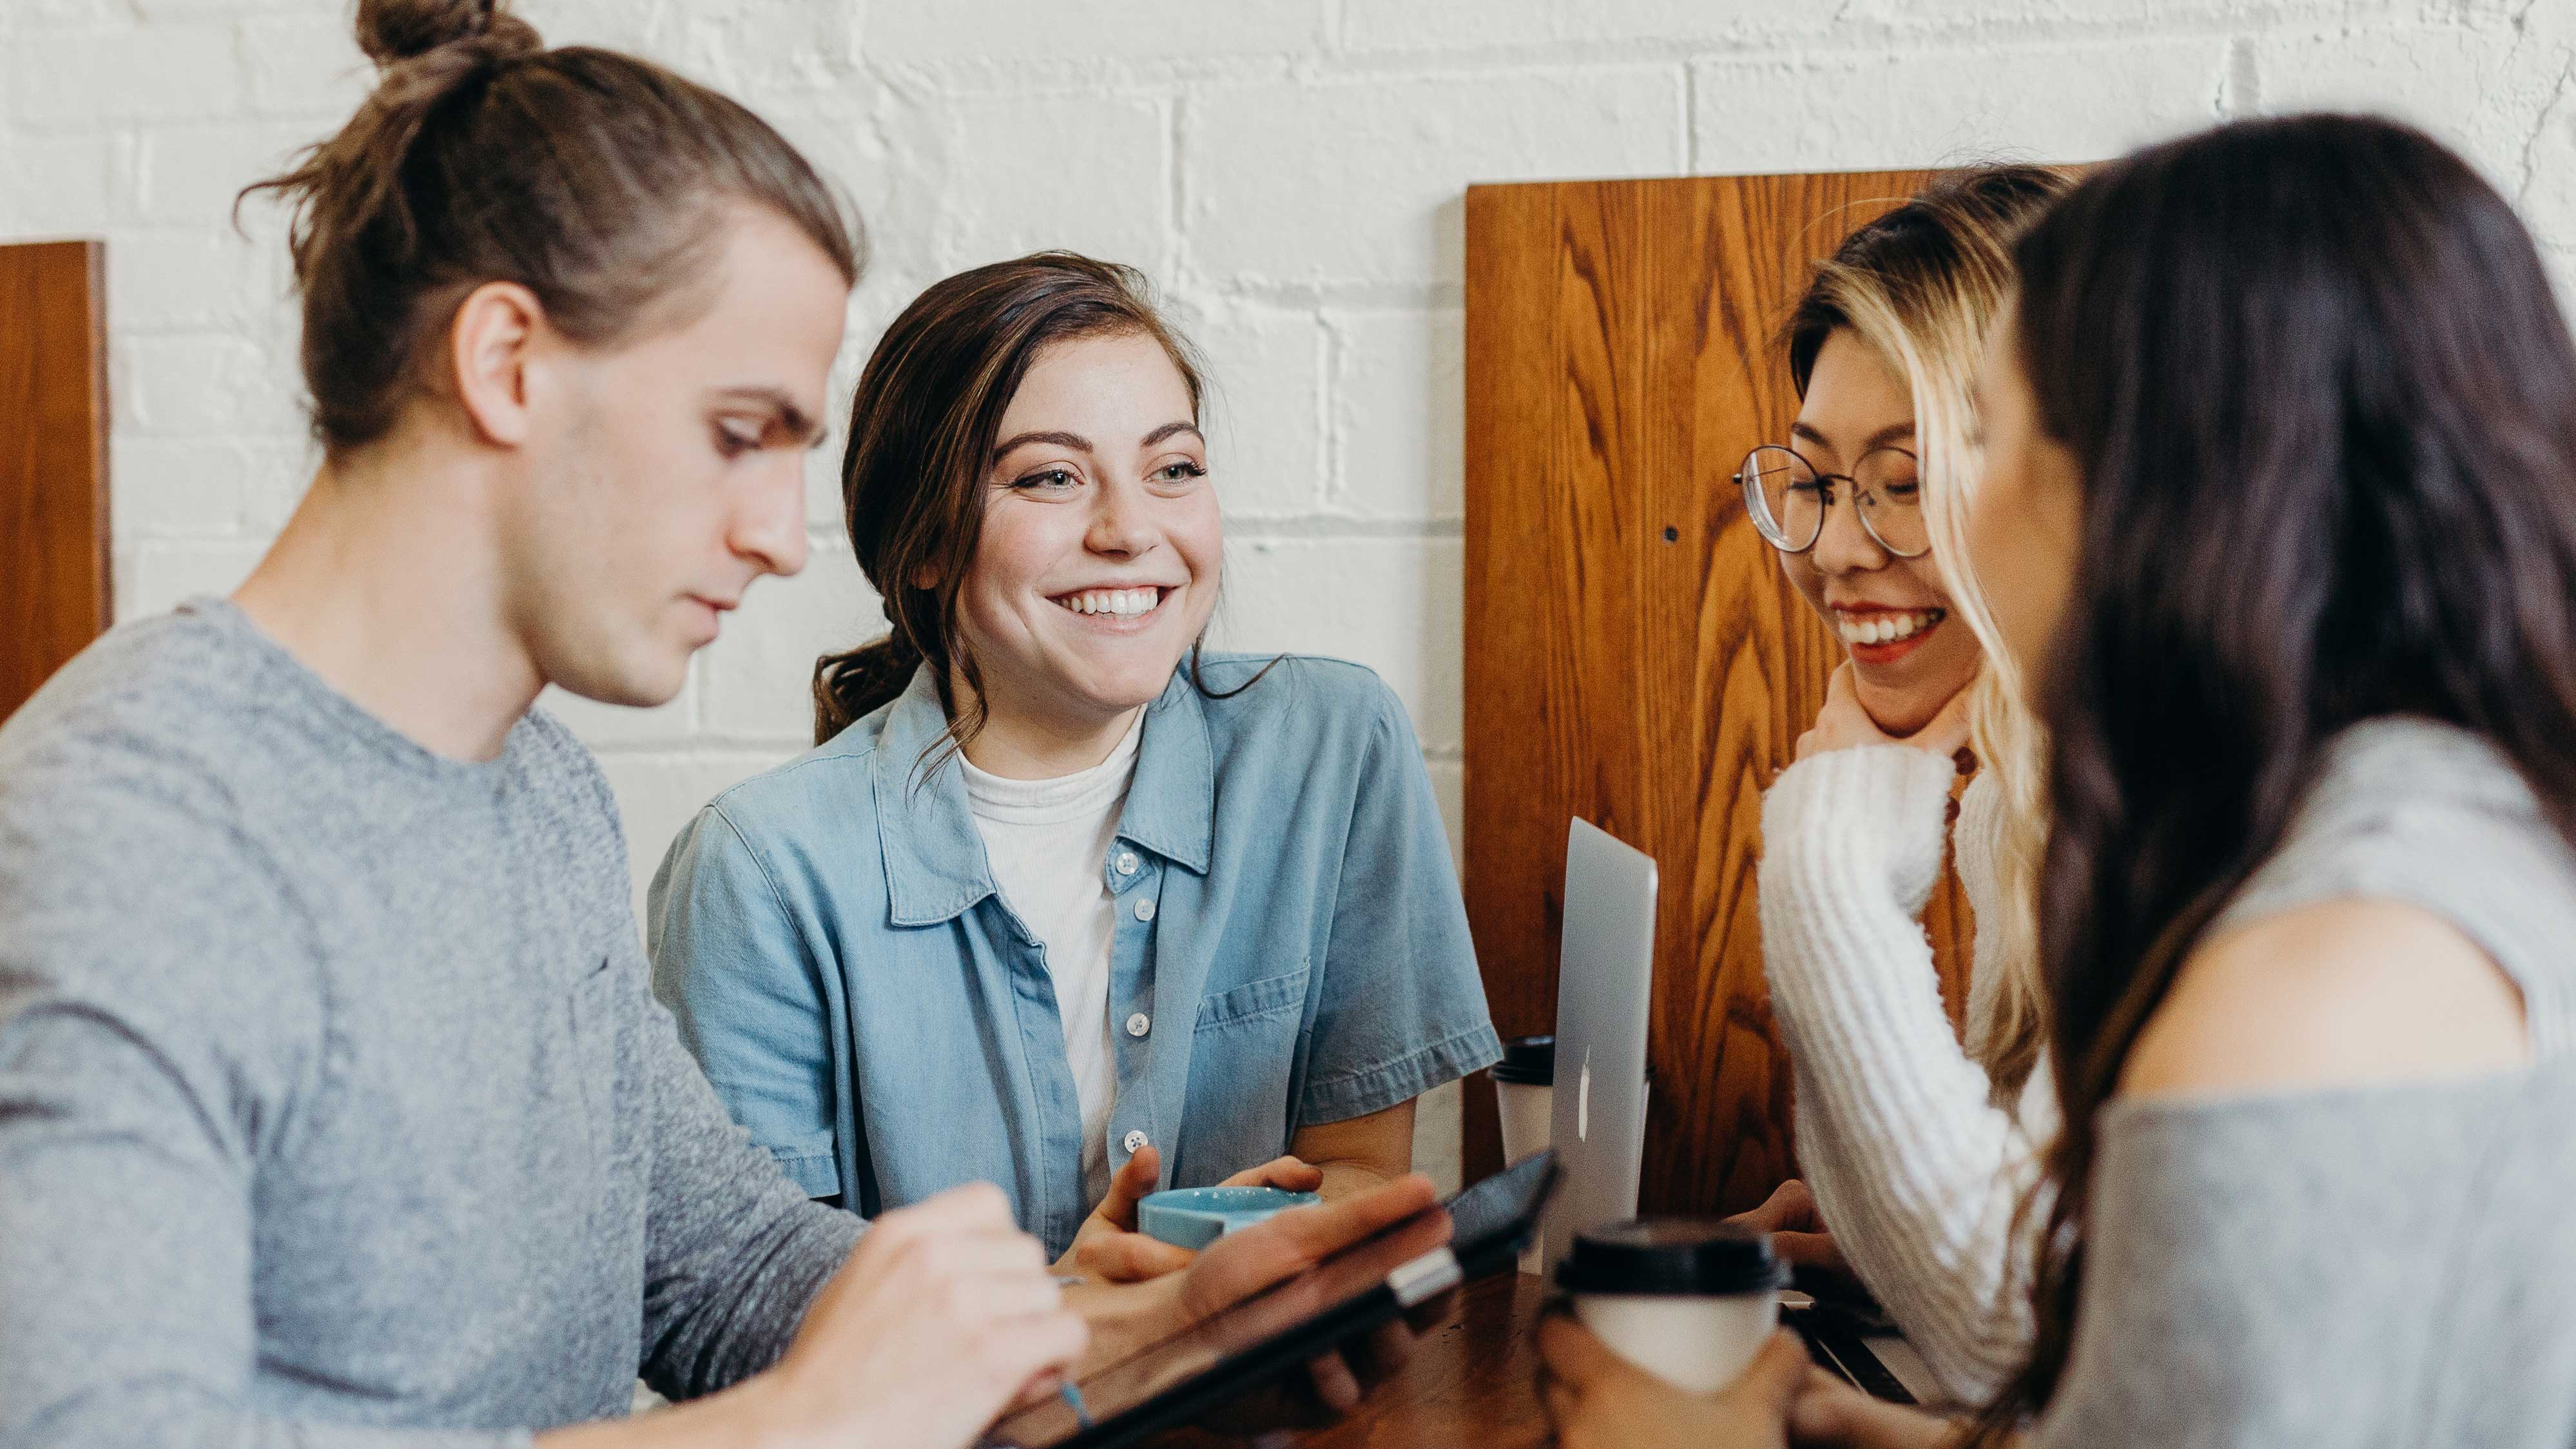 A group of four people working together while they smile and have coffee together.